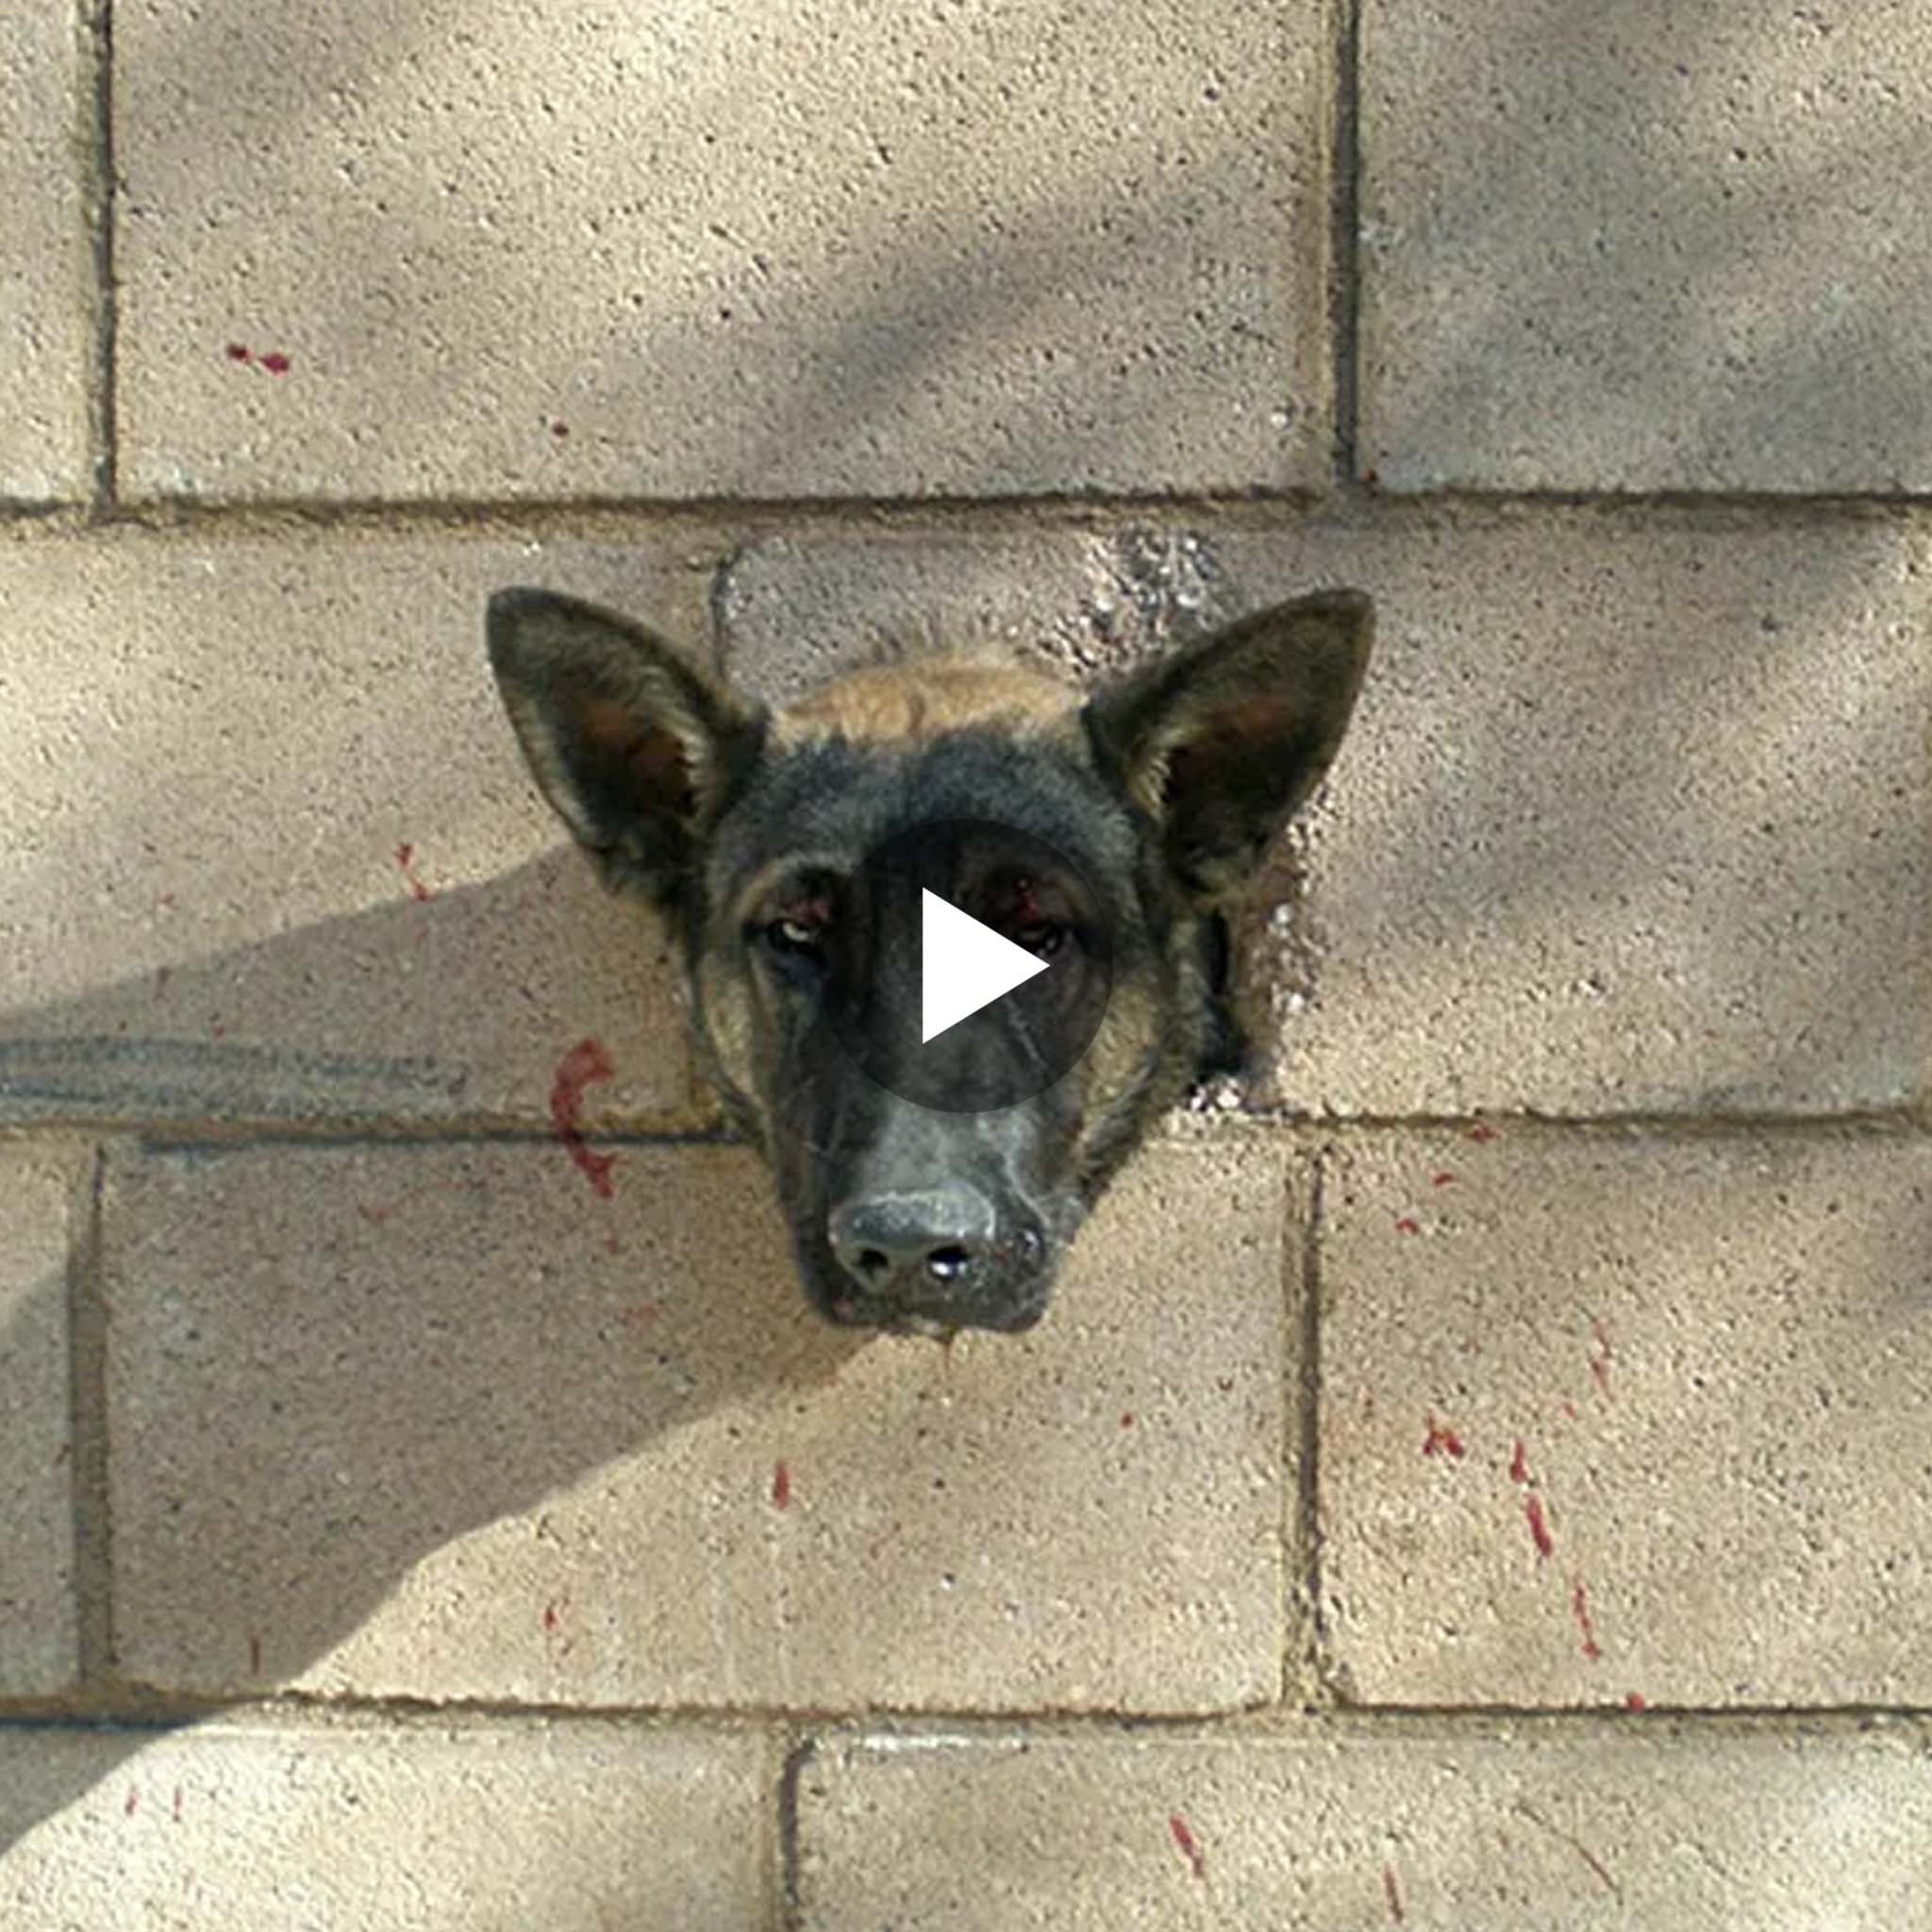 The Terrifying Ordeal of a Frightened Puppy, Cries of Fear and Agony Echo as His Head Wedges in a Concrete Wall.